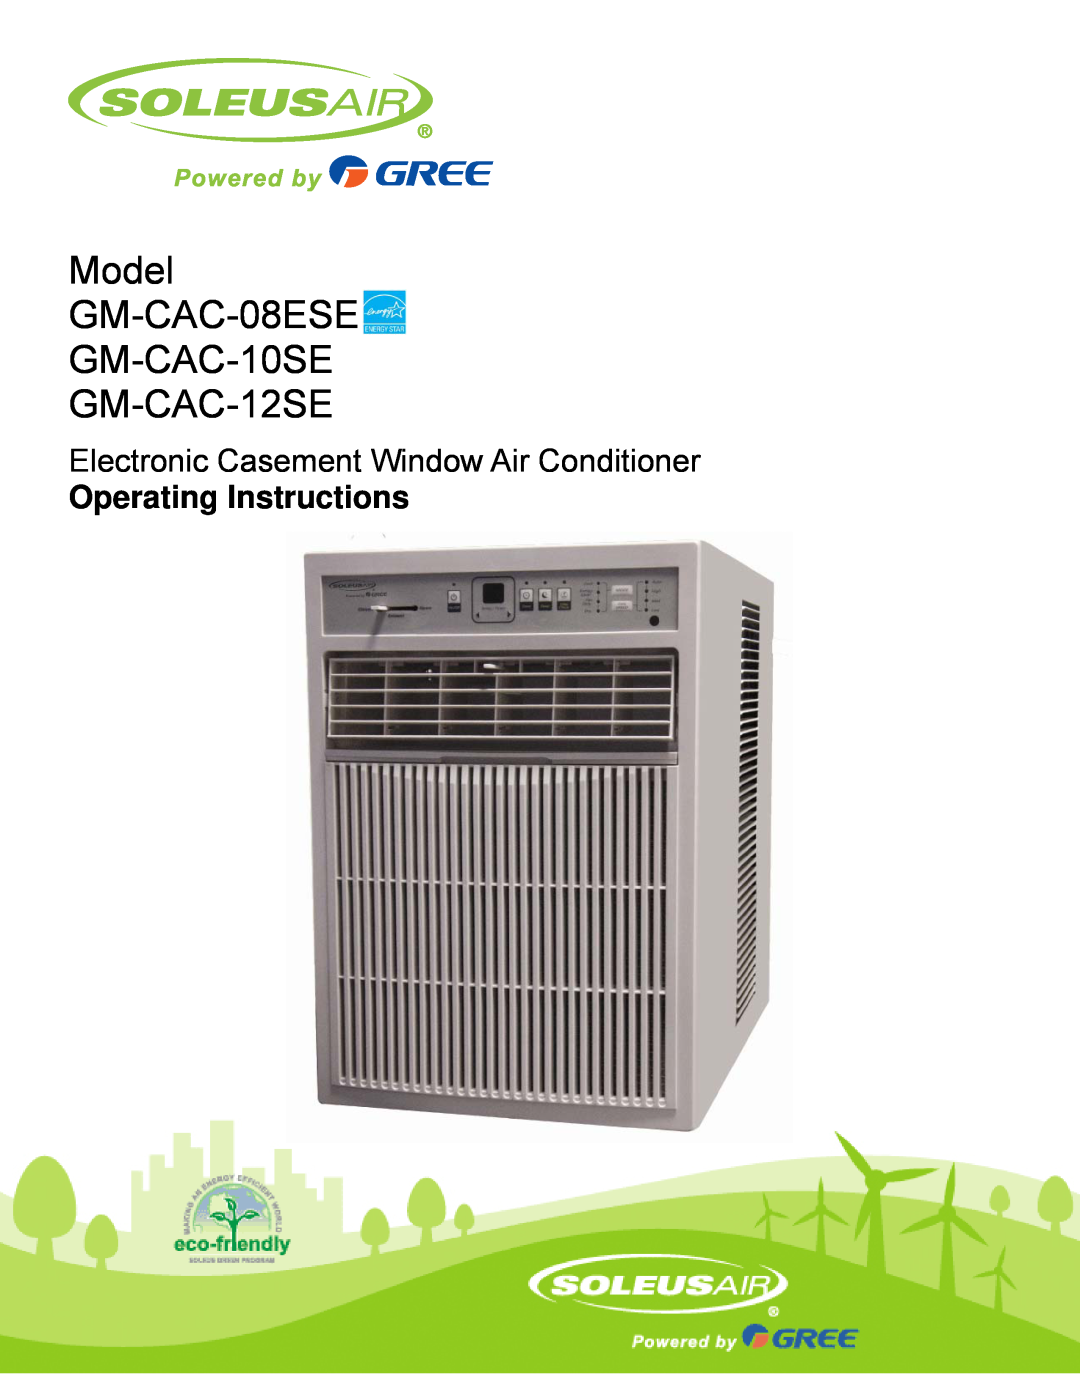 Soleus Air manual Model GM-CAC-08ESE GM-CAC-10SE GM-CAC-12SE, Electronic Casement Window Air Conditioner 